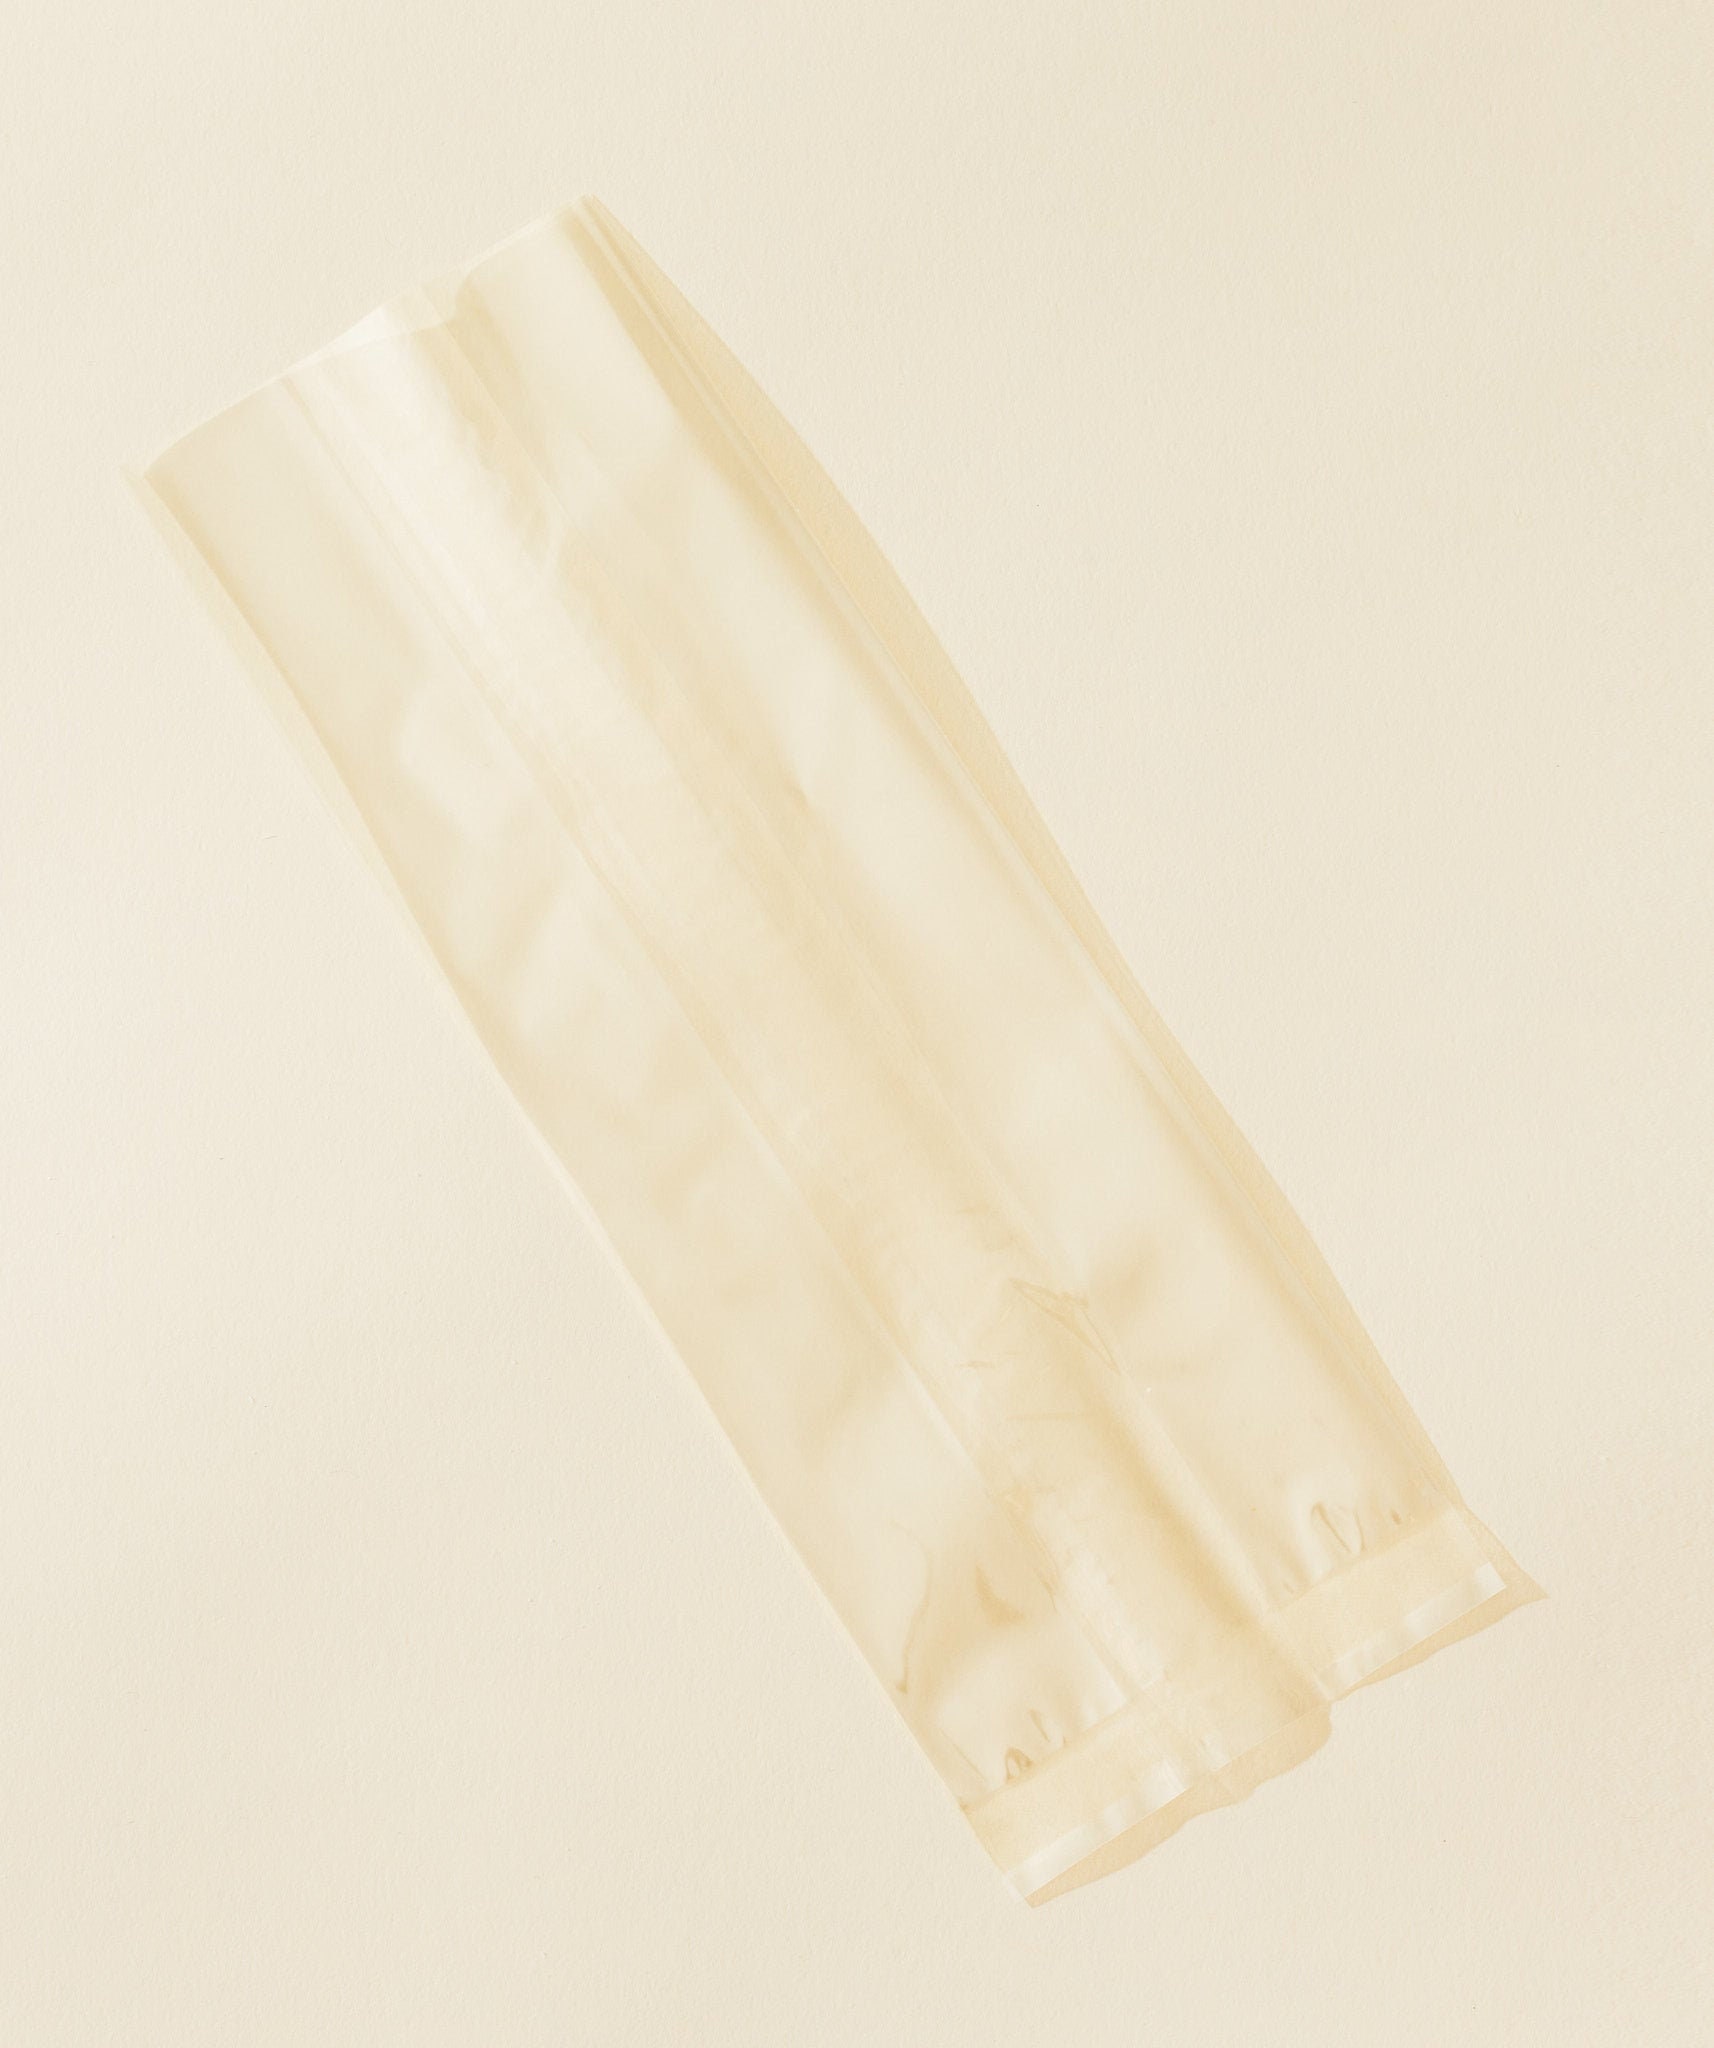 200 Pcs 2x3 Inch Clear Resealable Cello / Cellophane Bags Good for Bakery,  Candle, Soap, Cookie